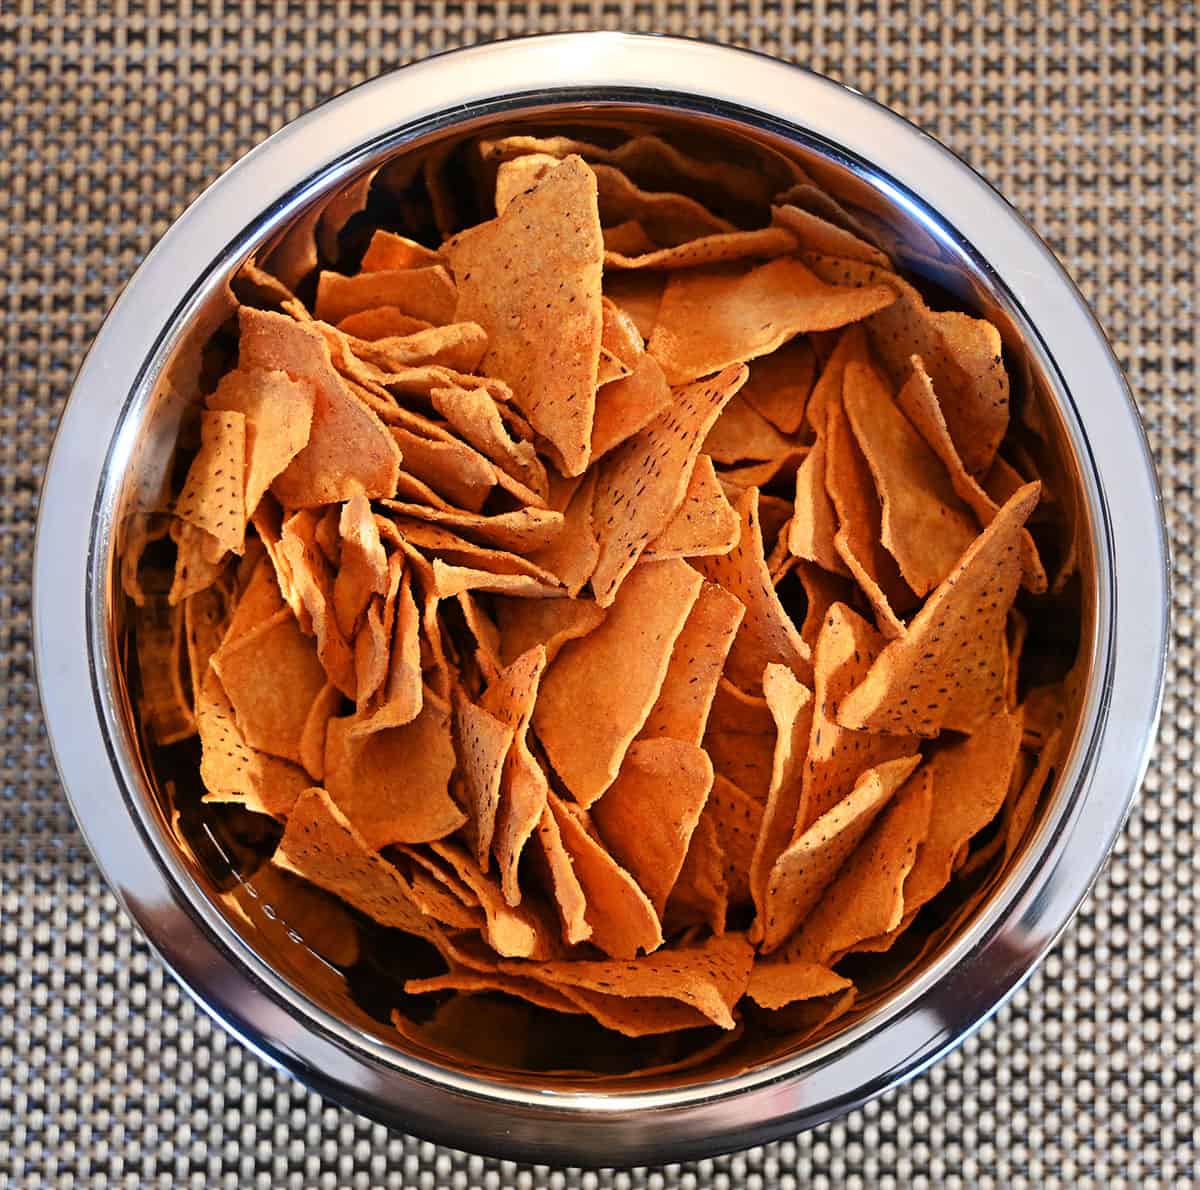 Top down image of a bowl full of chips sitting on a table.